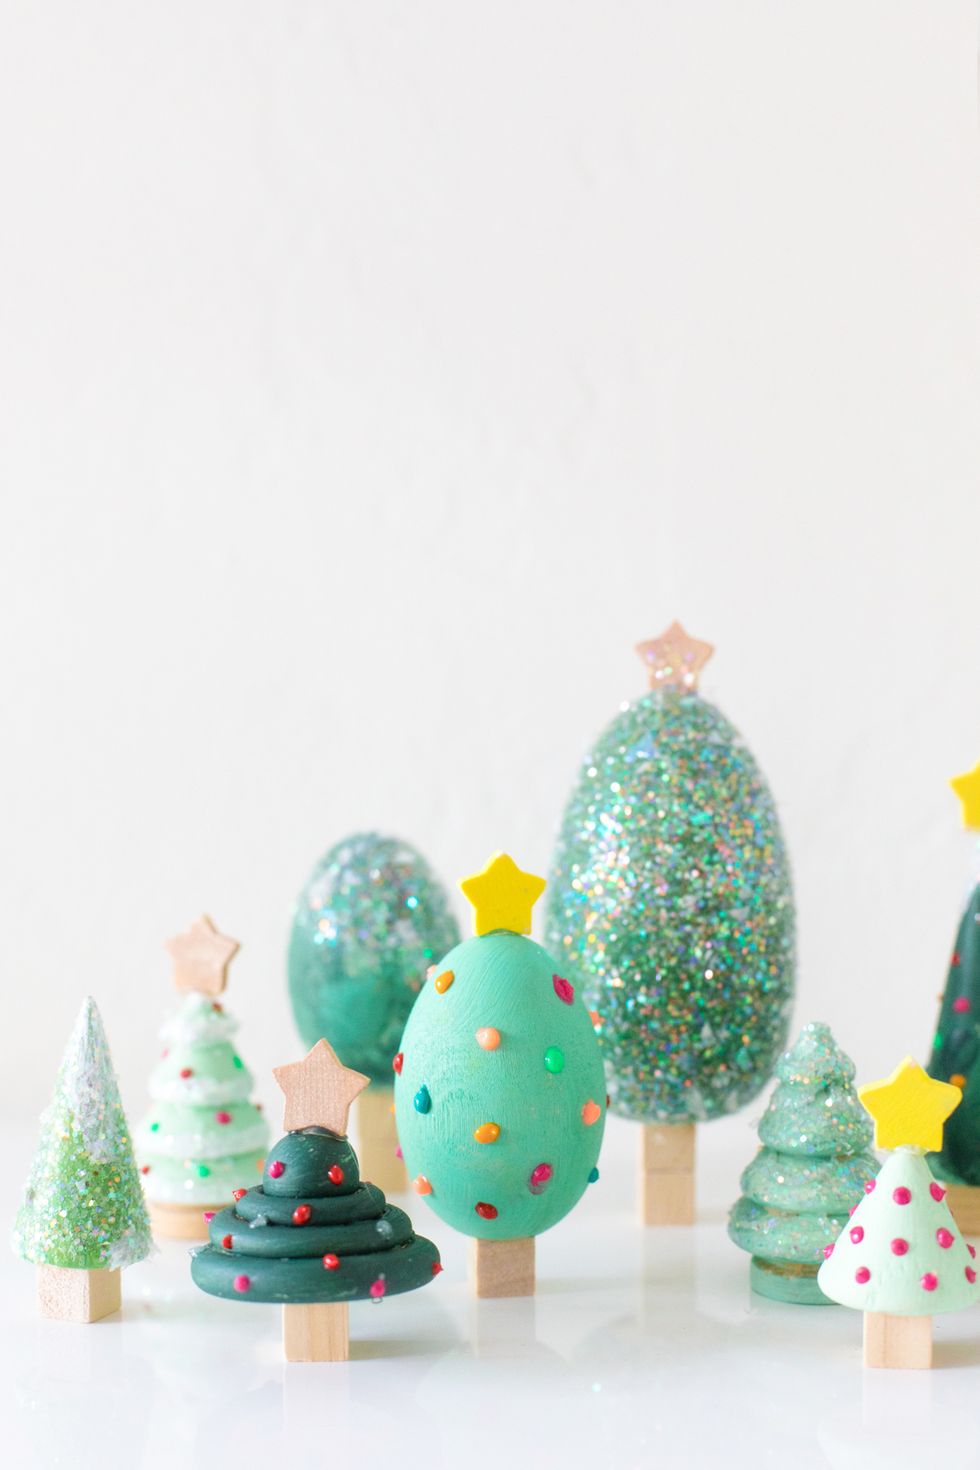 Decorate with Tiny Christmas Trees